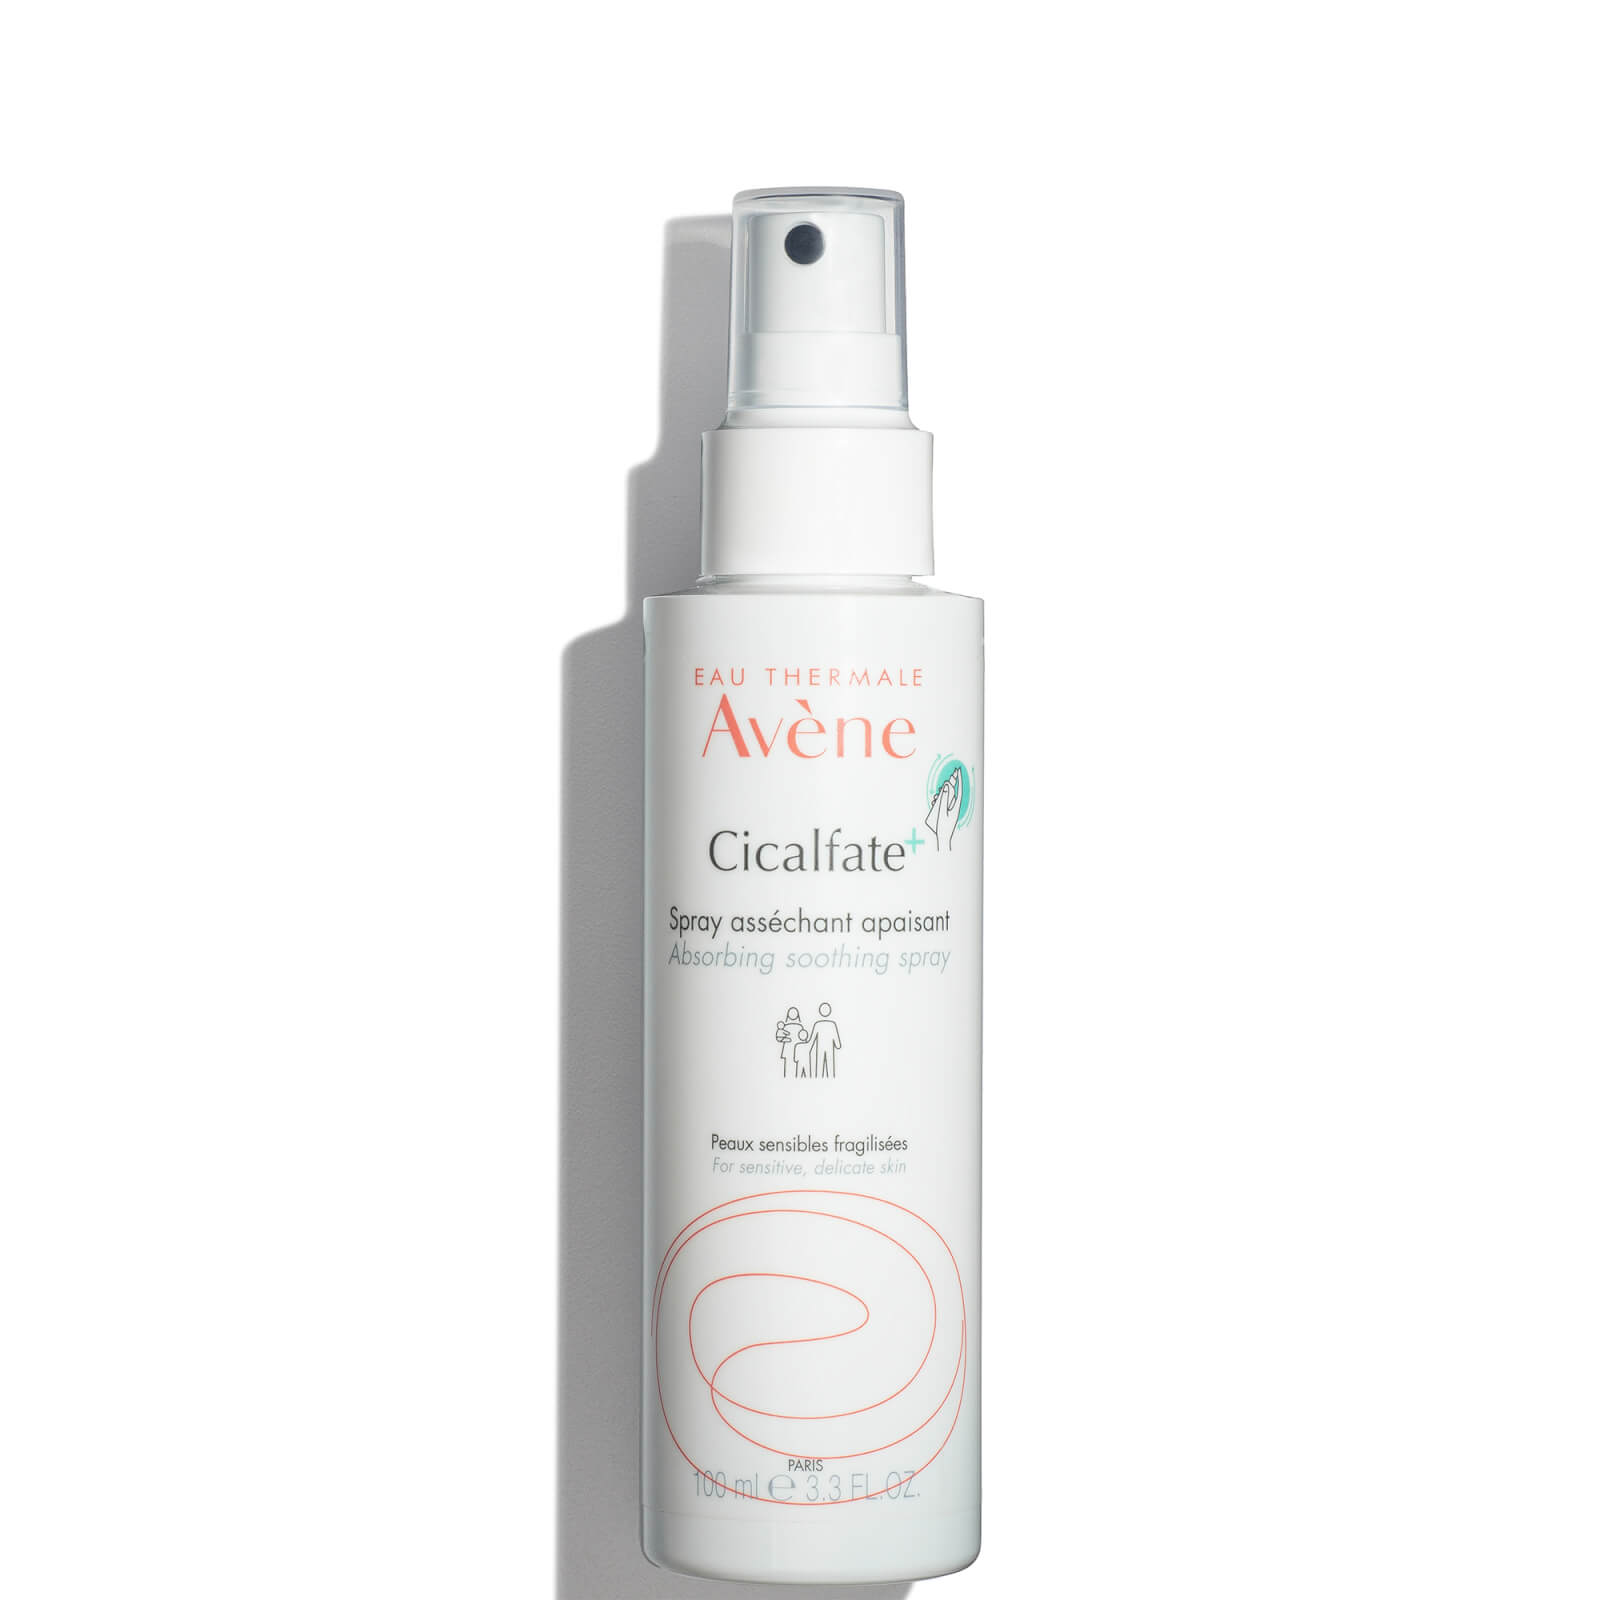 Avene Avène Cicalfate+ Absorbing Soothing Spray 3.3 Fl.oz. In White